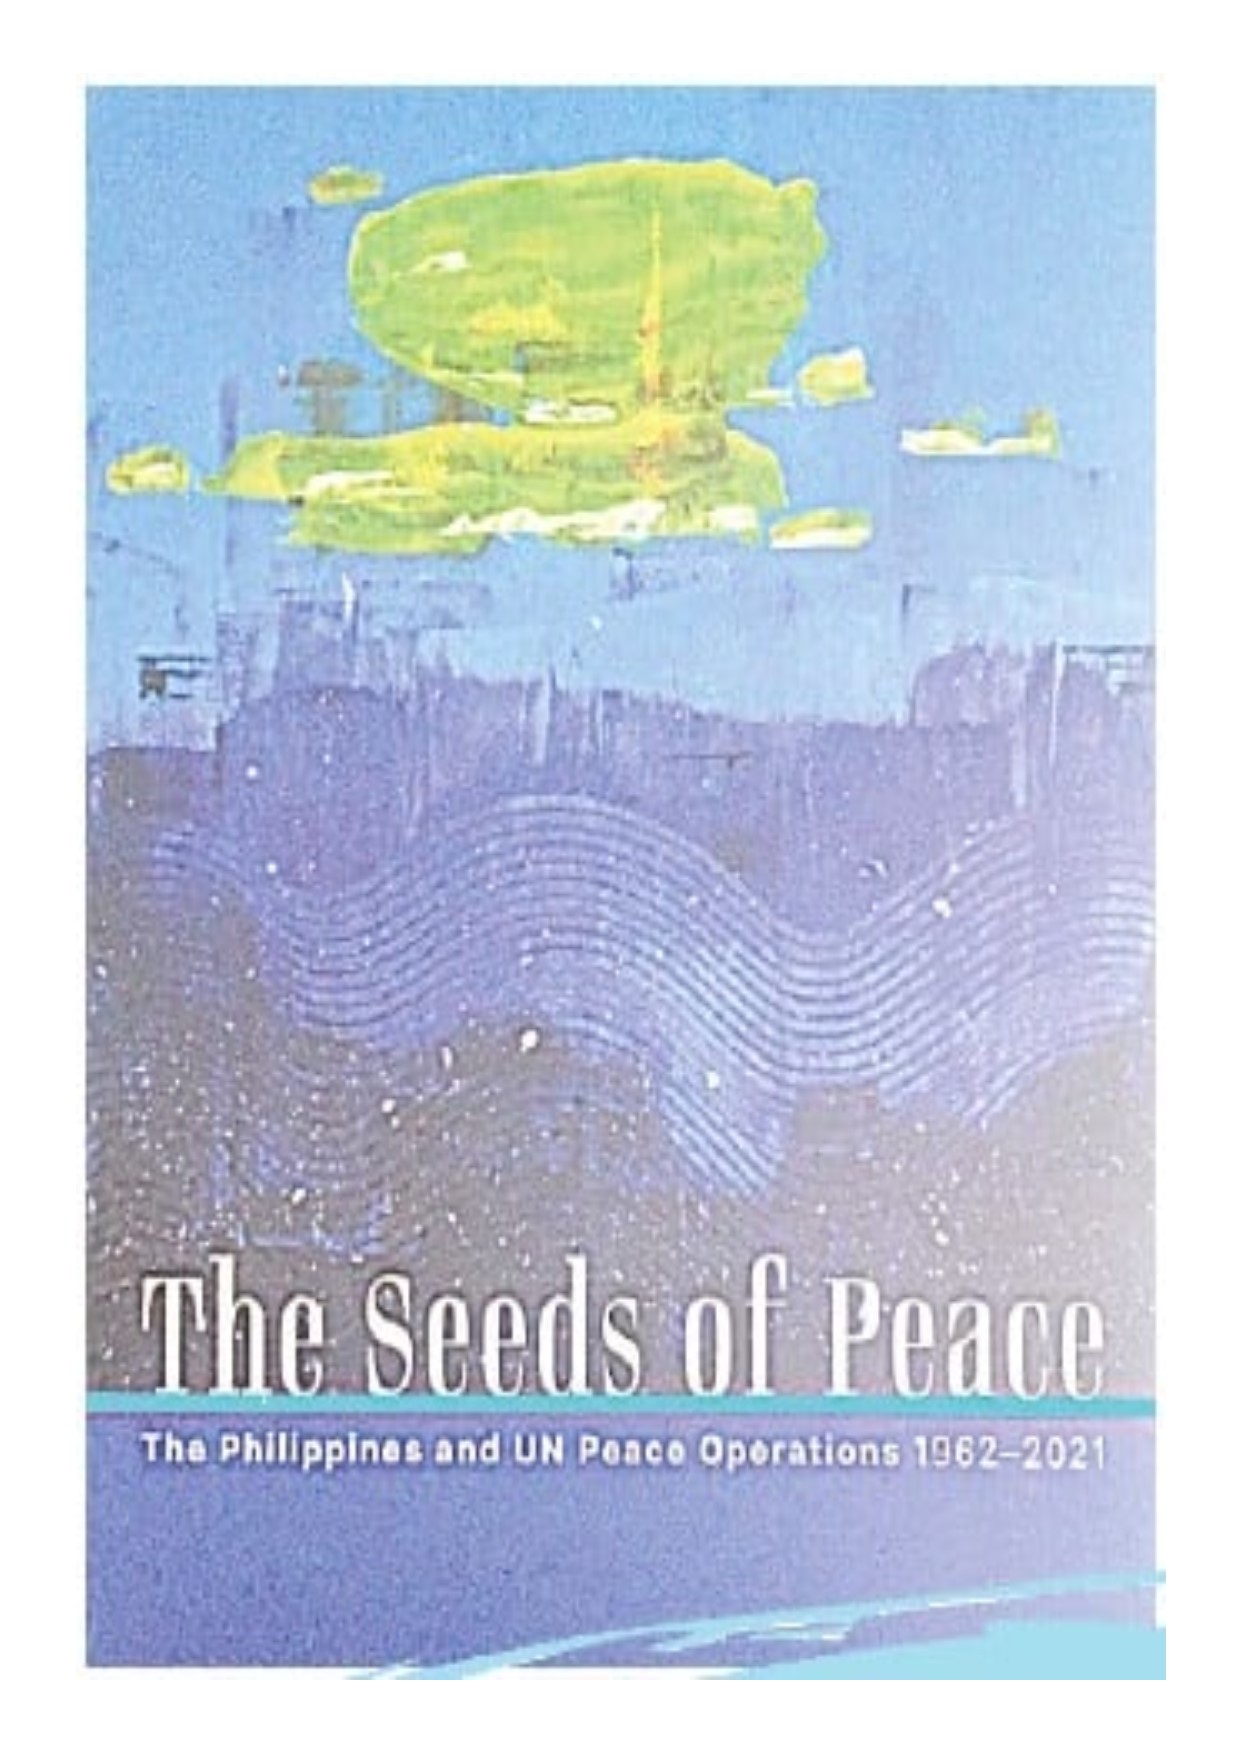 The seeds of peace the Philippines and UN peace operations, 1962-2021